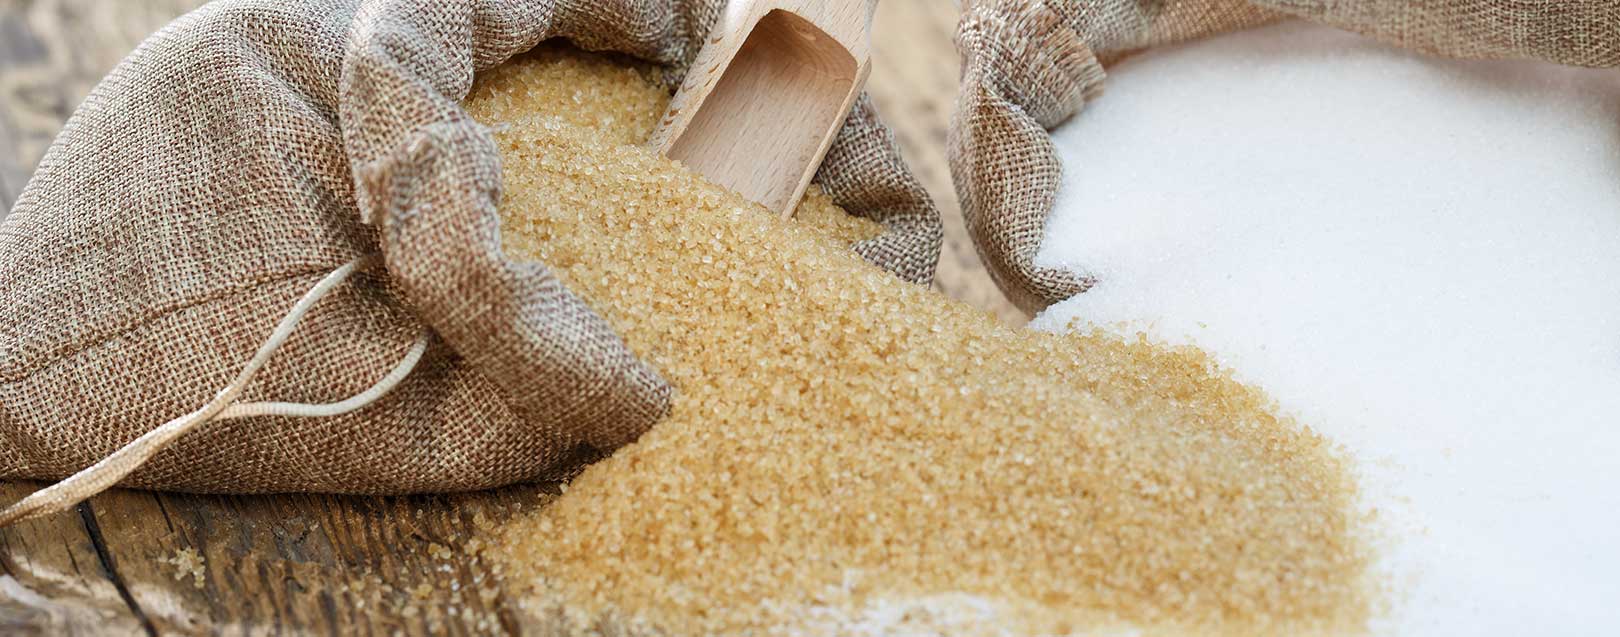 Govt hikes import duty on sugar to 50%